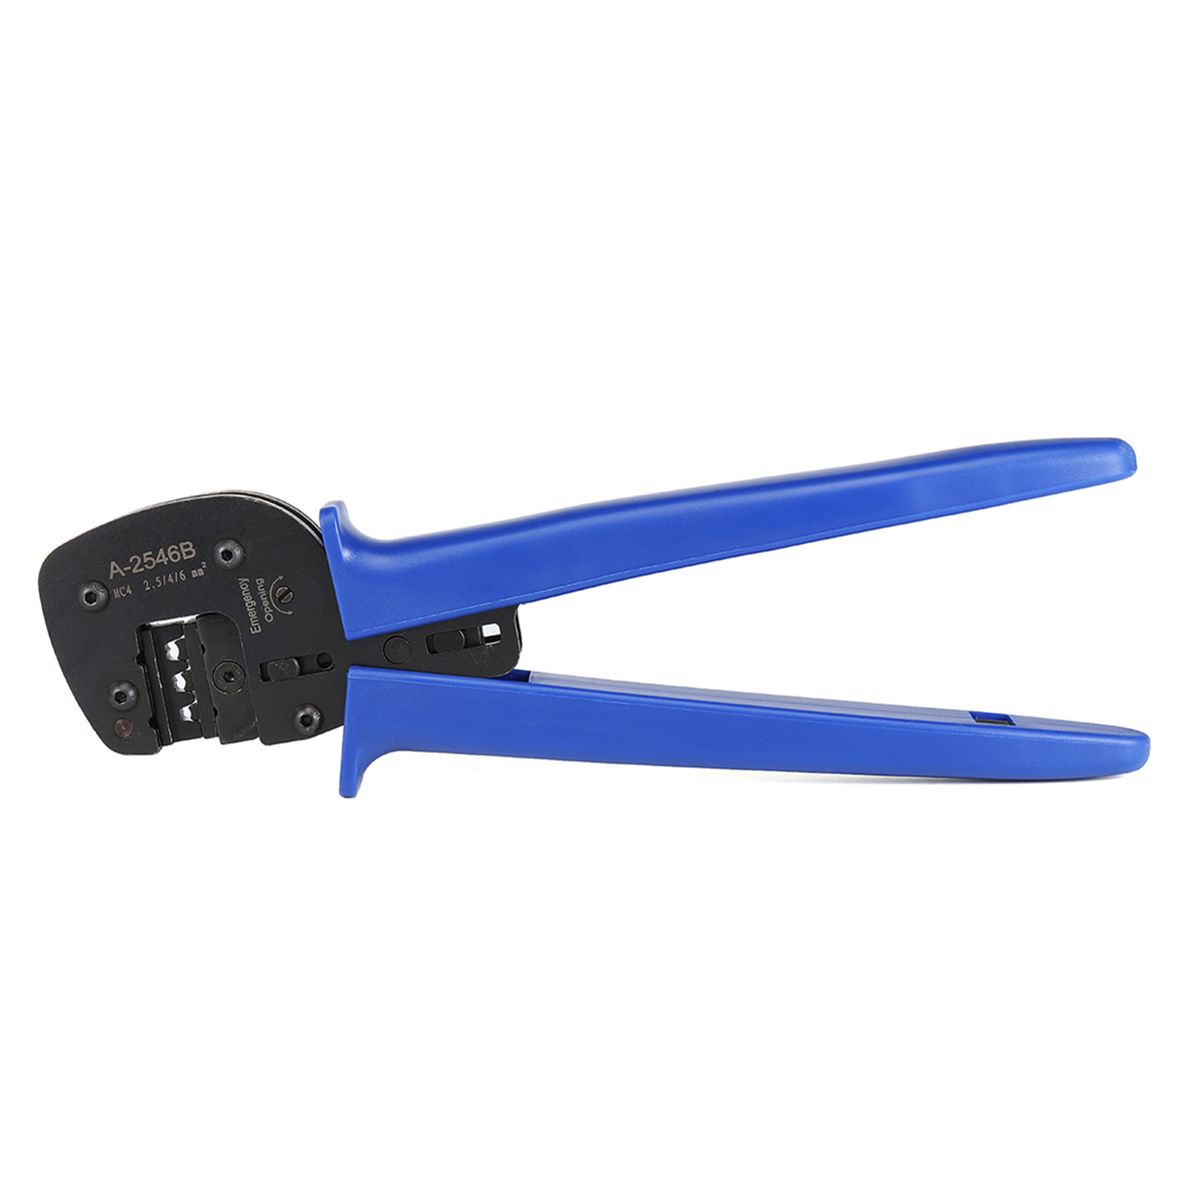 A-2546B-Solar-Crimping-Pliers-Tools-MC4-Connector-Terminal-Crimper-for-Solar-Panel-Cable-System-1276843